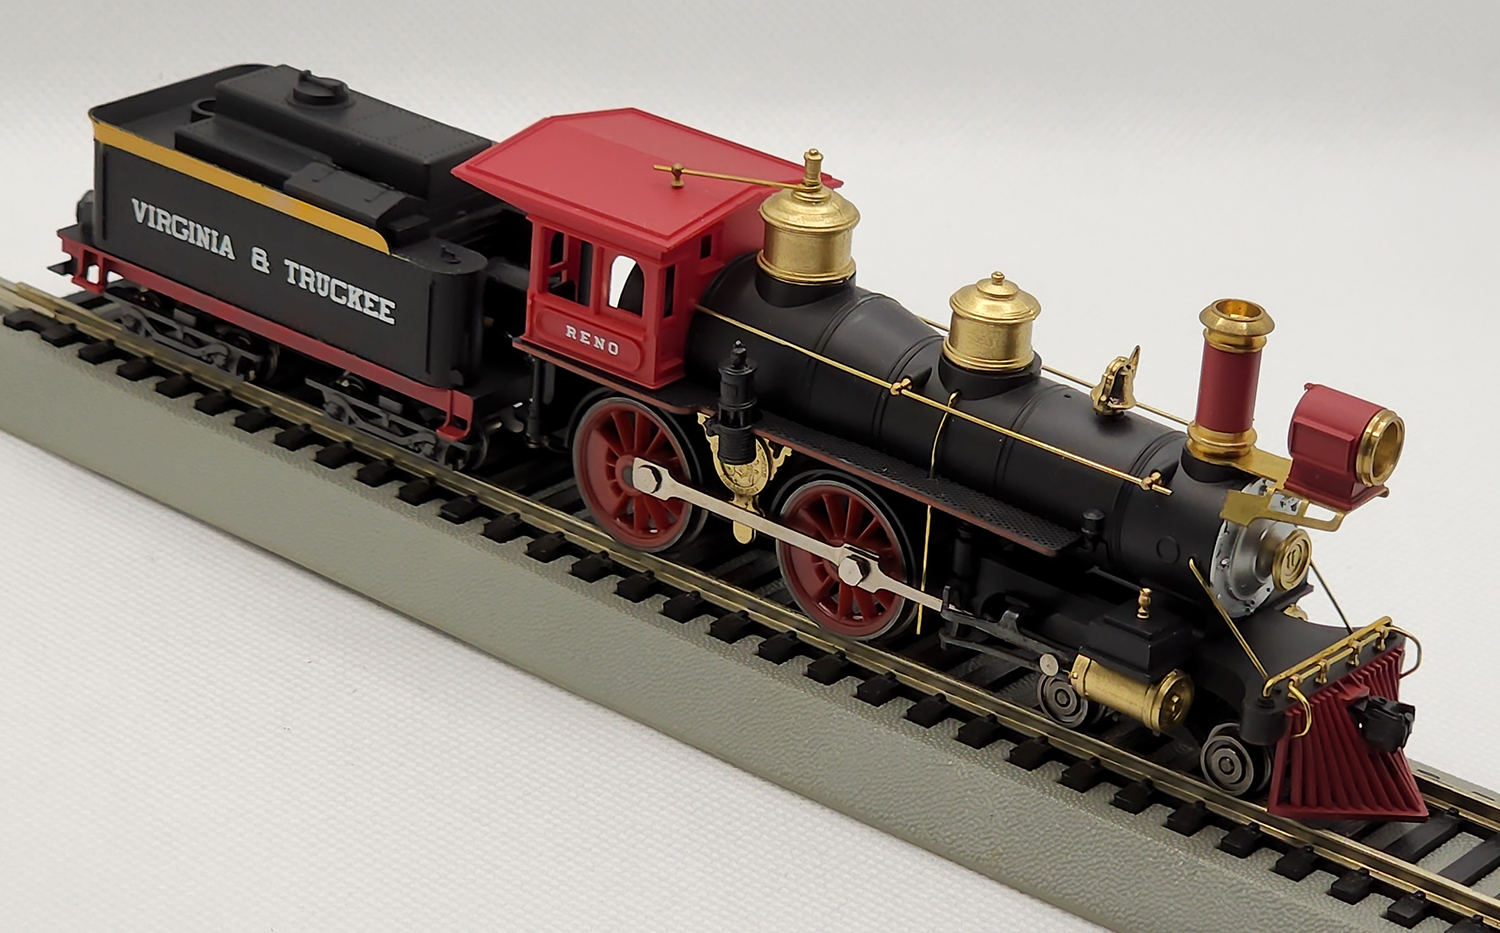 8th view of the Rivarossi Virginia & Truckee Steam Locomotive #5418 4-4-0 Reno in my HO-scale Collection